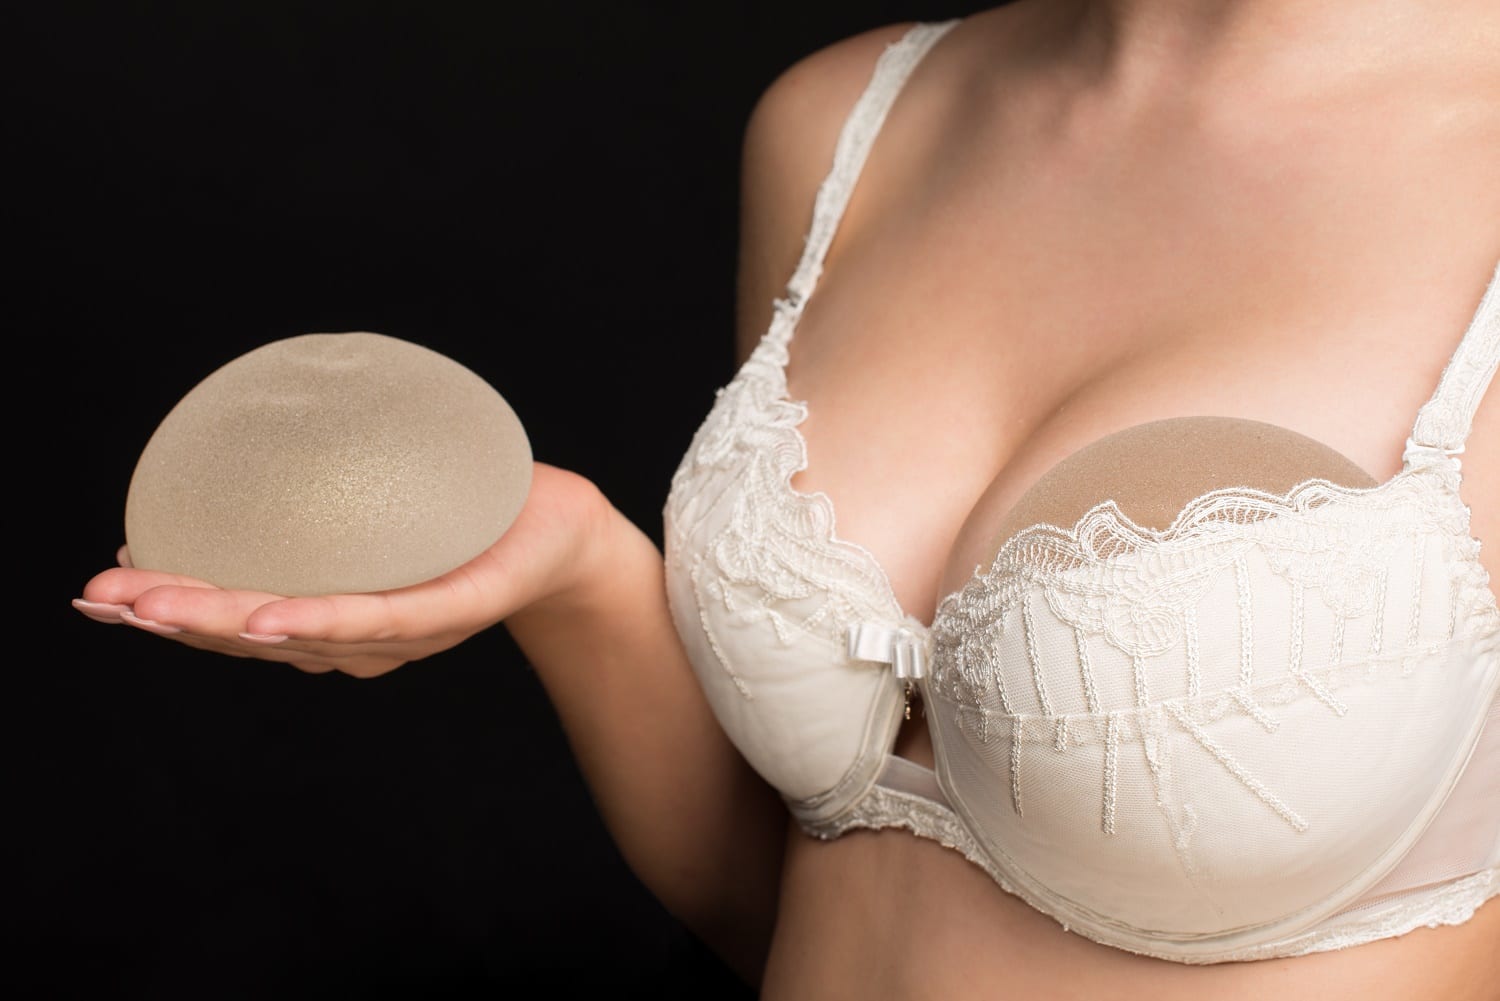 How to Pick the Right Implant Size for Your Breast Augmentation